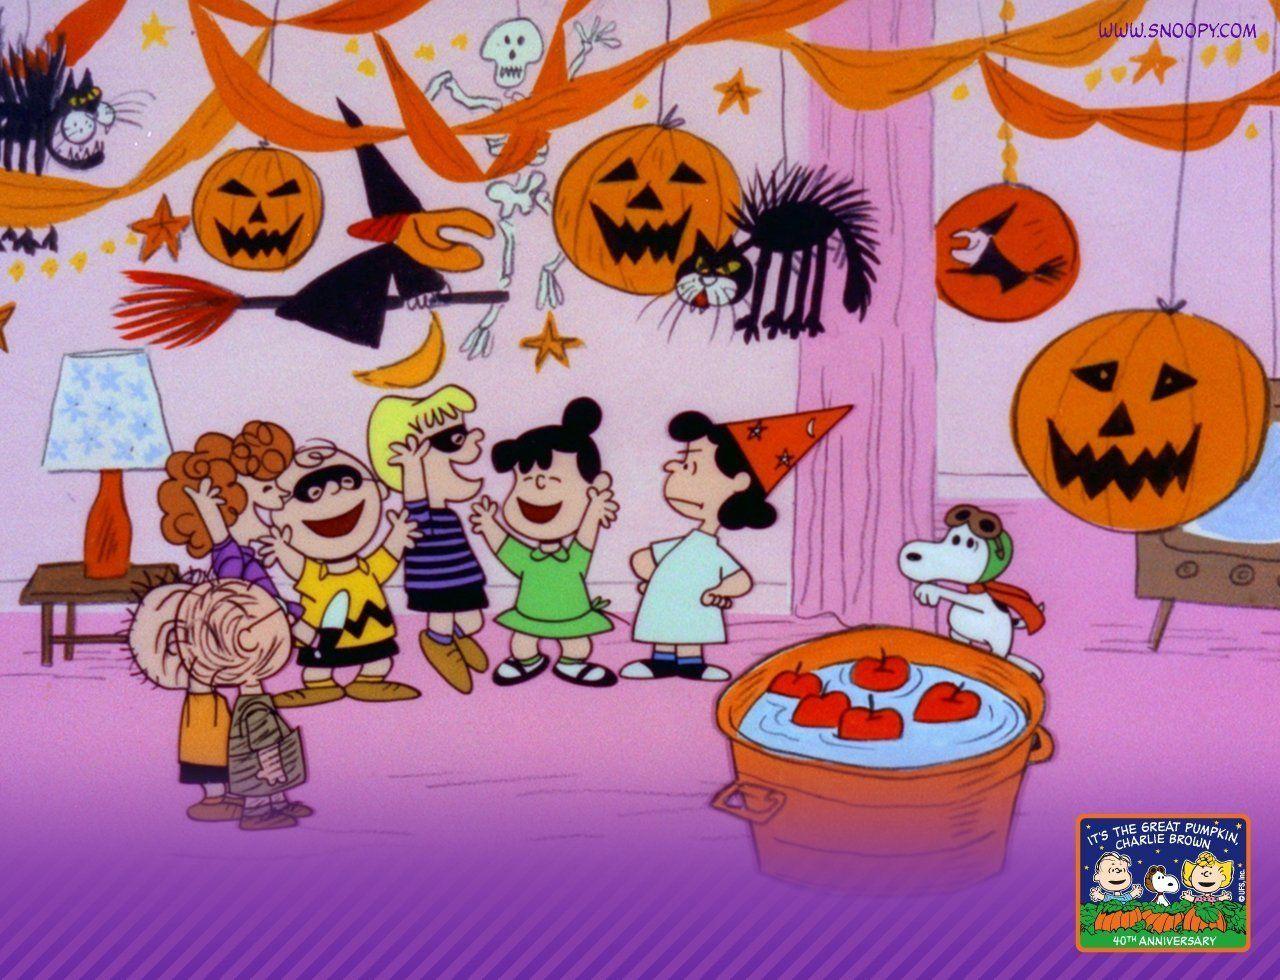 Charlie Brown Halloween wallpaper. Search Results. coolstyle